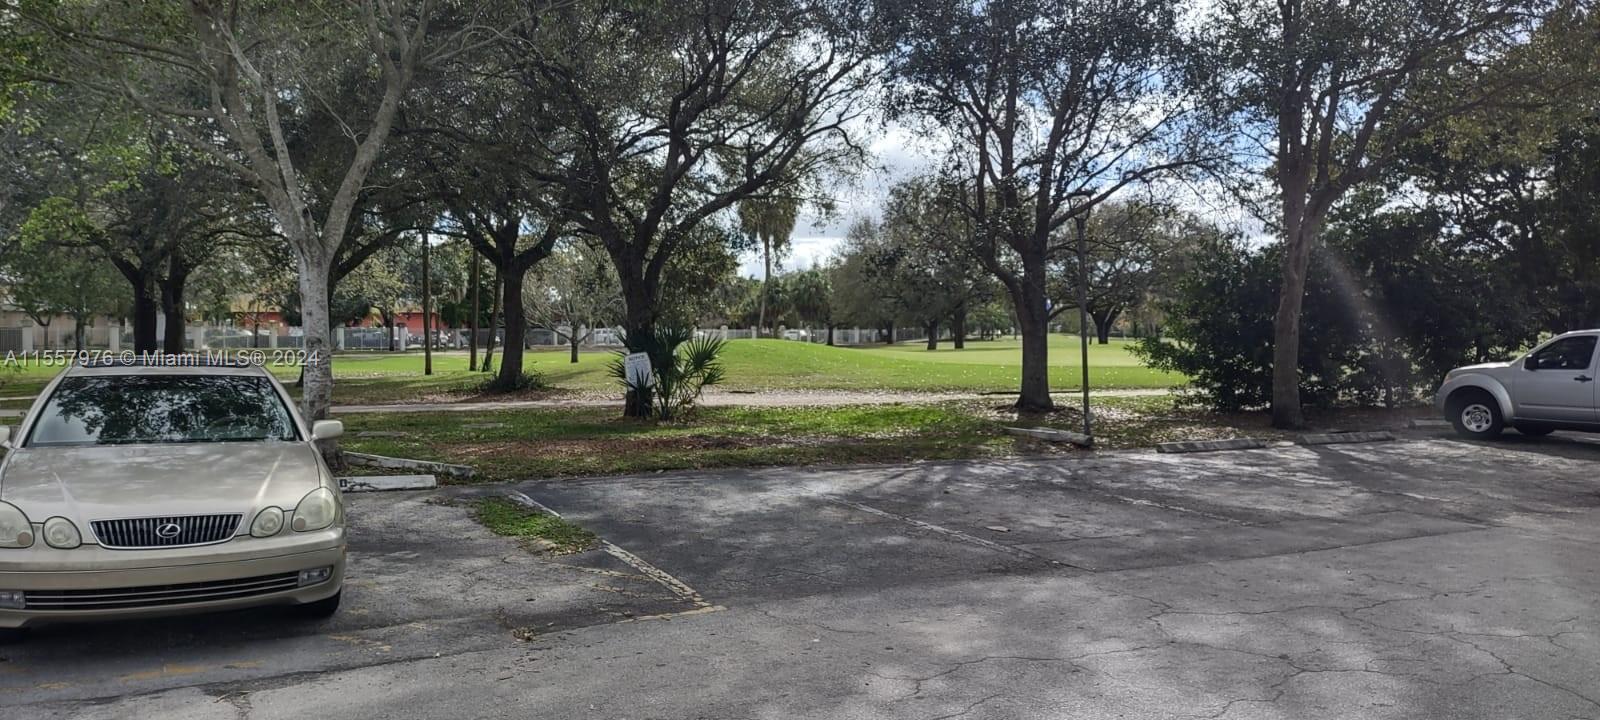 a view of a park with lots of cars parked on the road